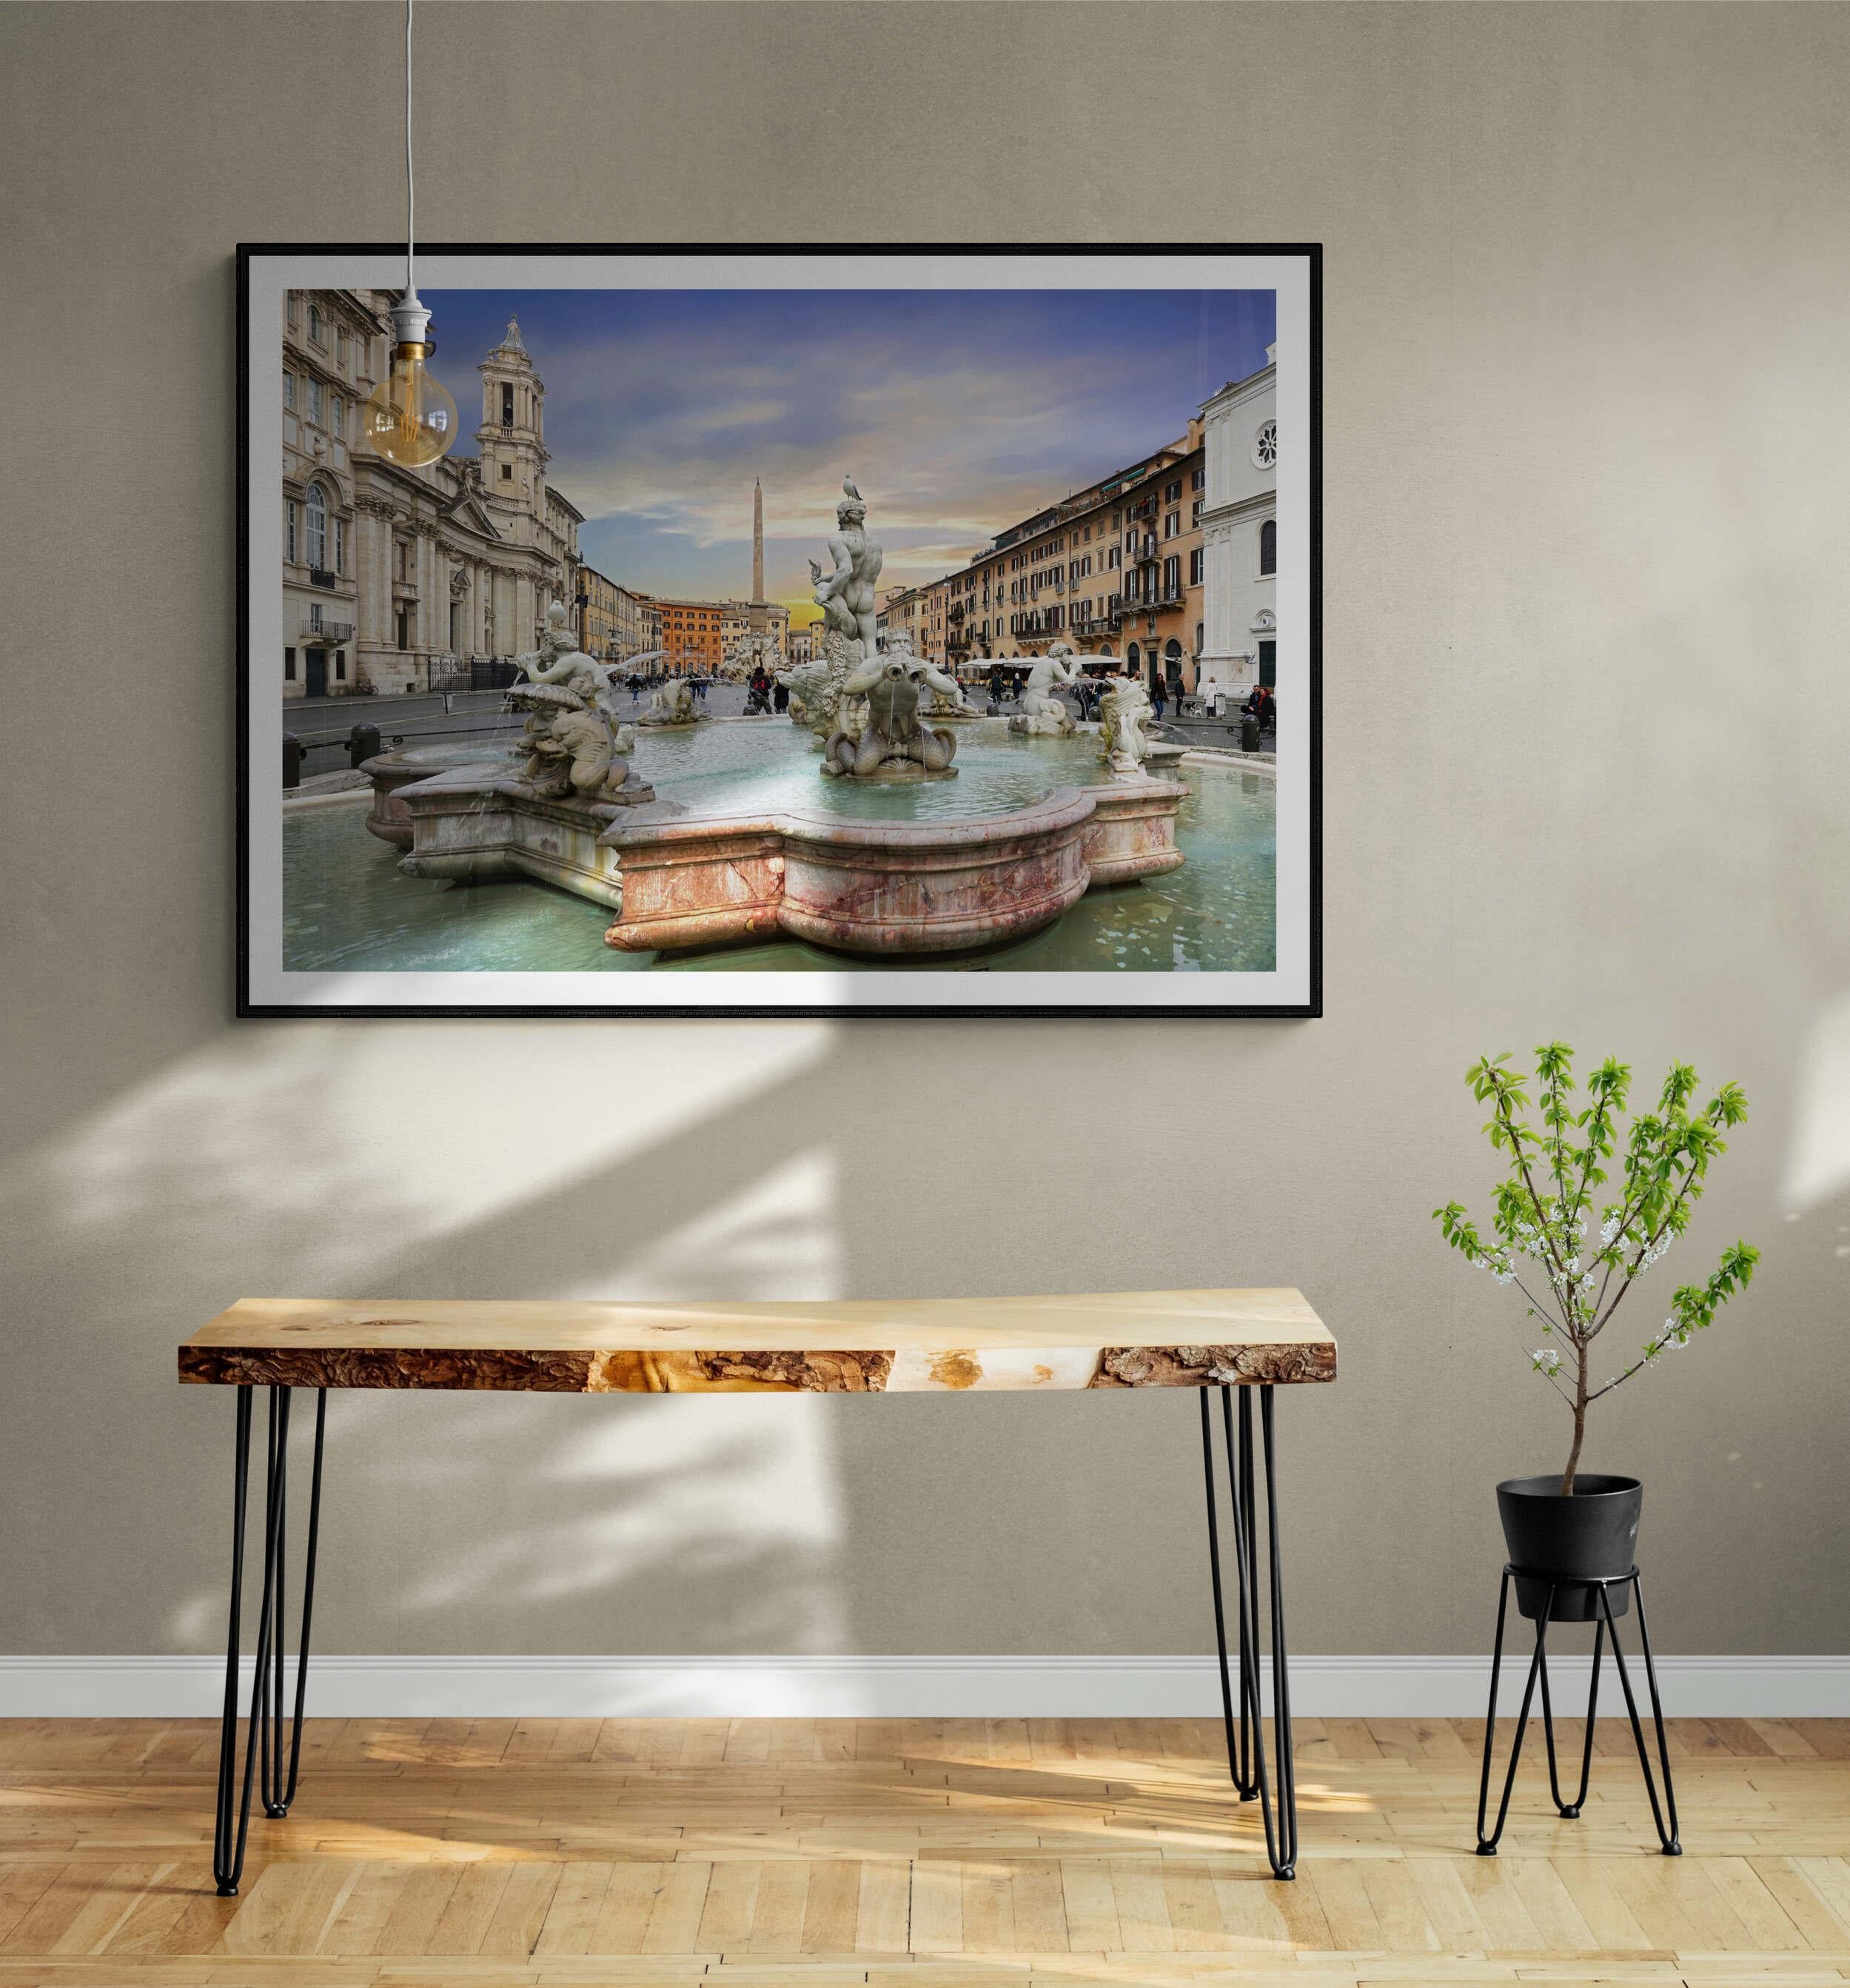 Pigment photographic paper - photography & fine art print © Jean Pierre De Neef 
Artwork sold in perfect condition from a limited edition of 12 ex- Composition from an assembly of 12 shots digitaly edited and made in 2019
This panoramic montage is